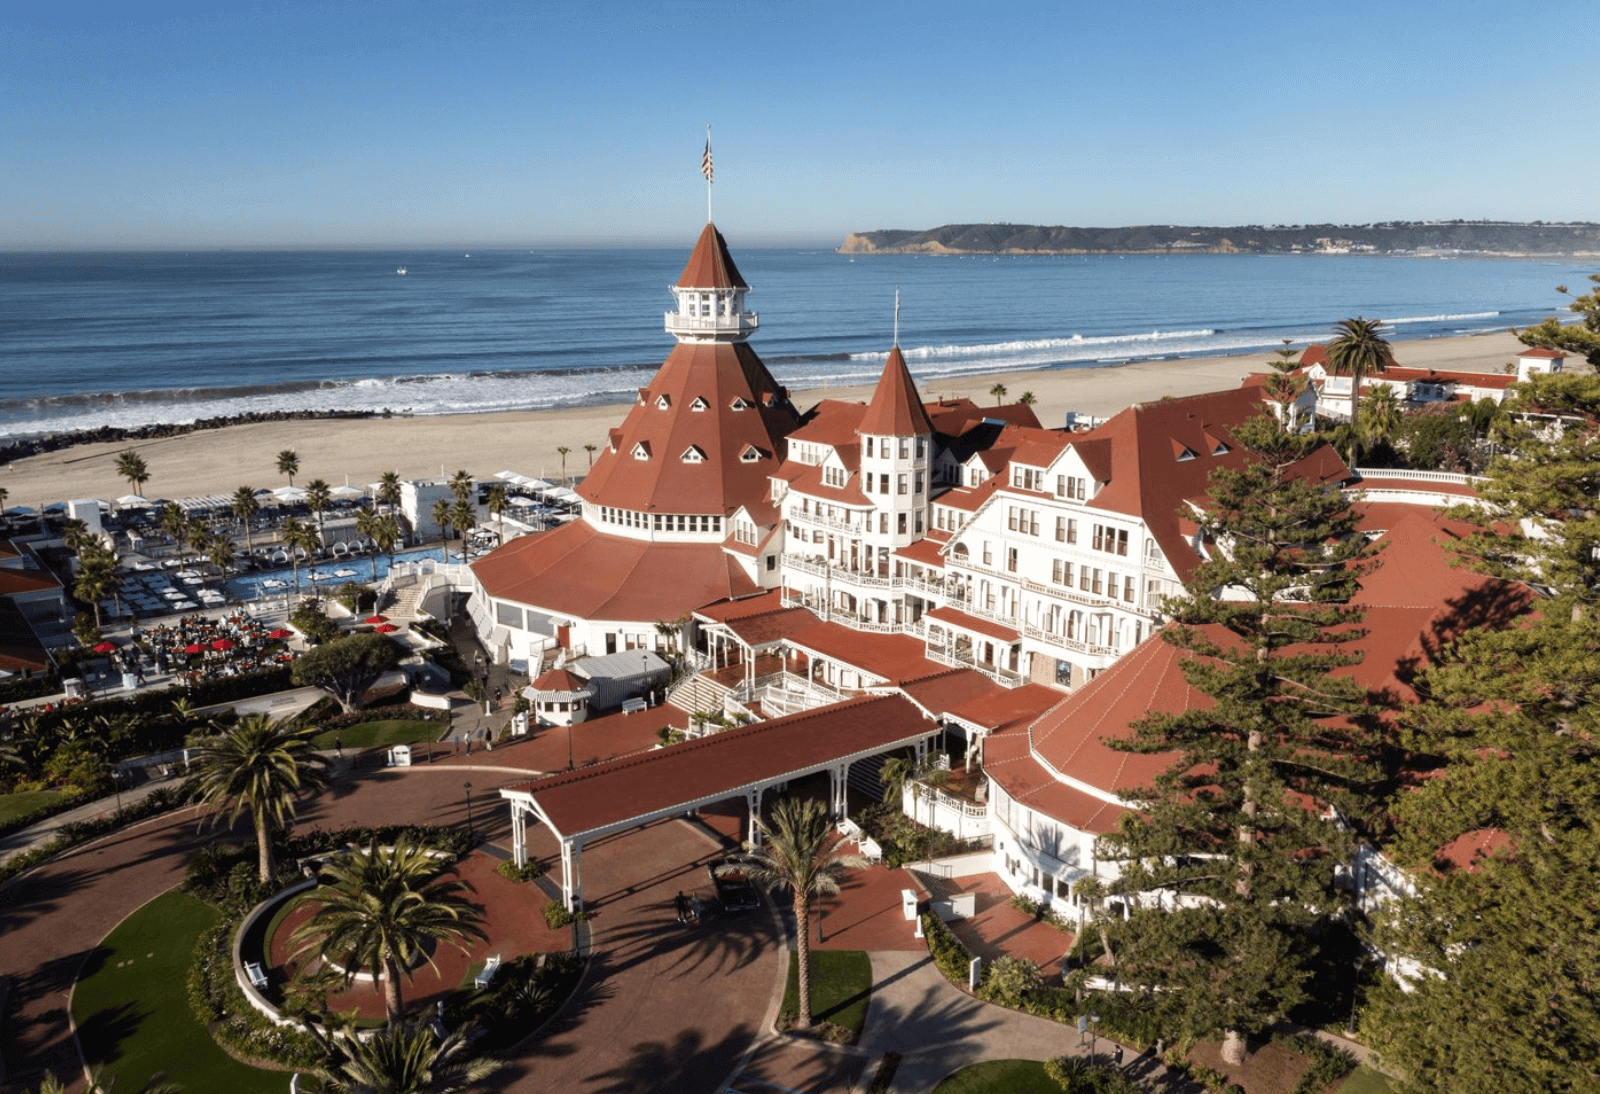 An aerial view of the Hotel del Coronado in San Diego.